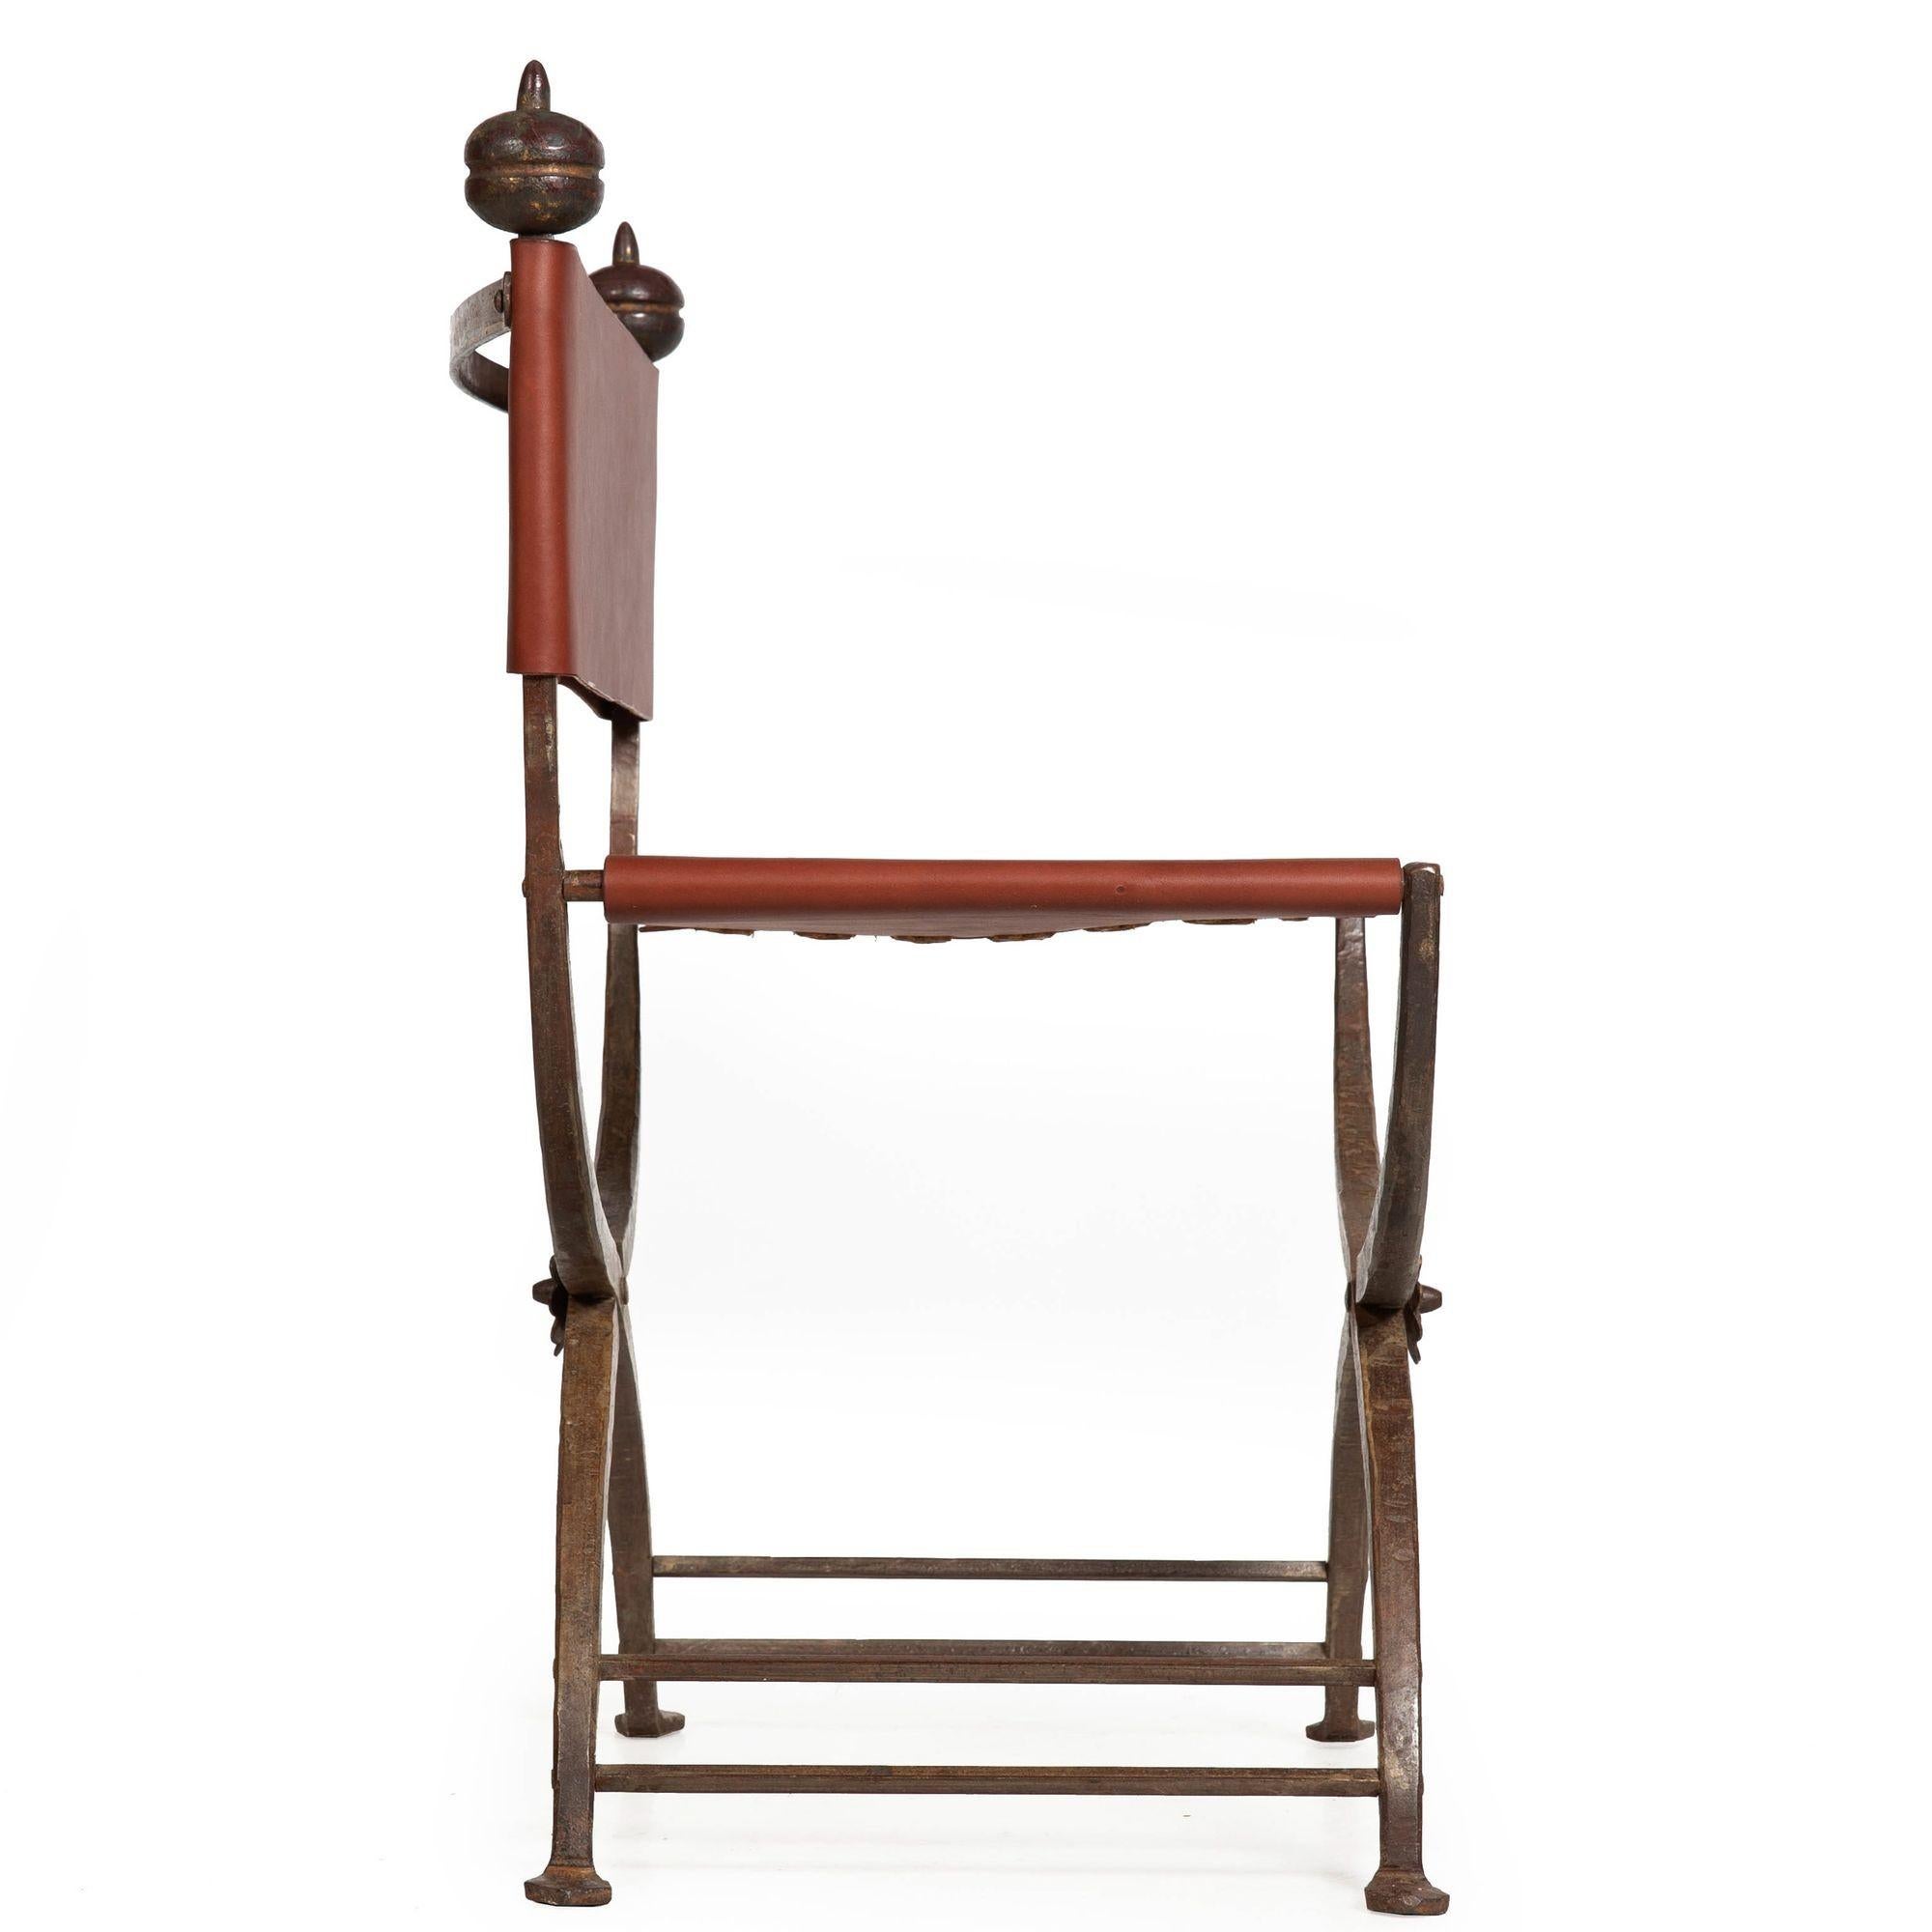 20th Century Antique Wrought-Iron and Leather Savonarola Chair, early 20th century For Sale